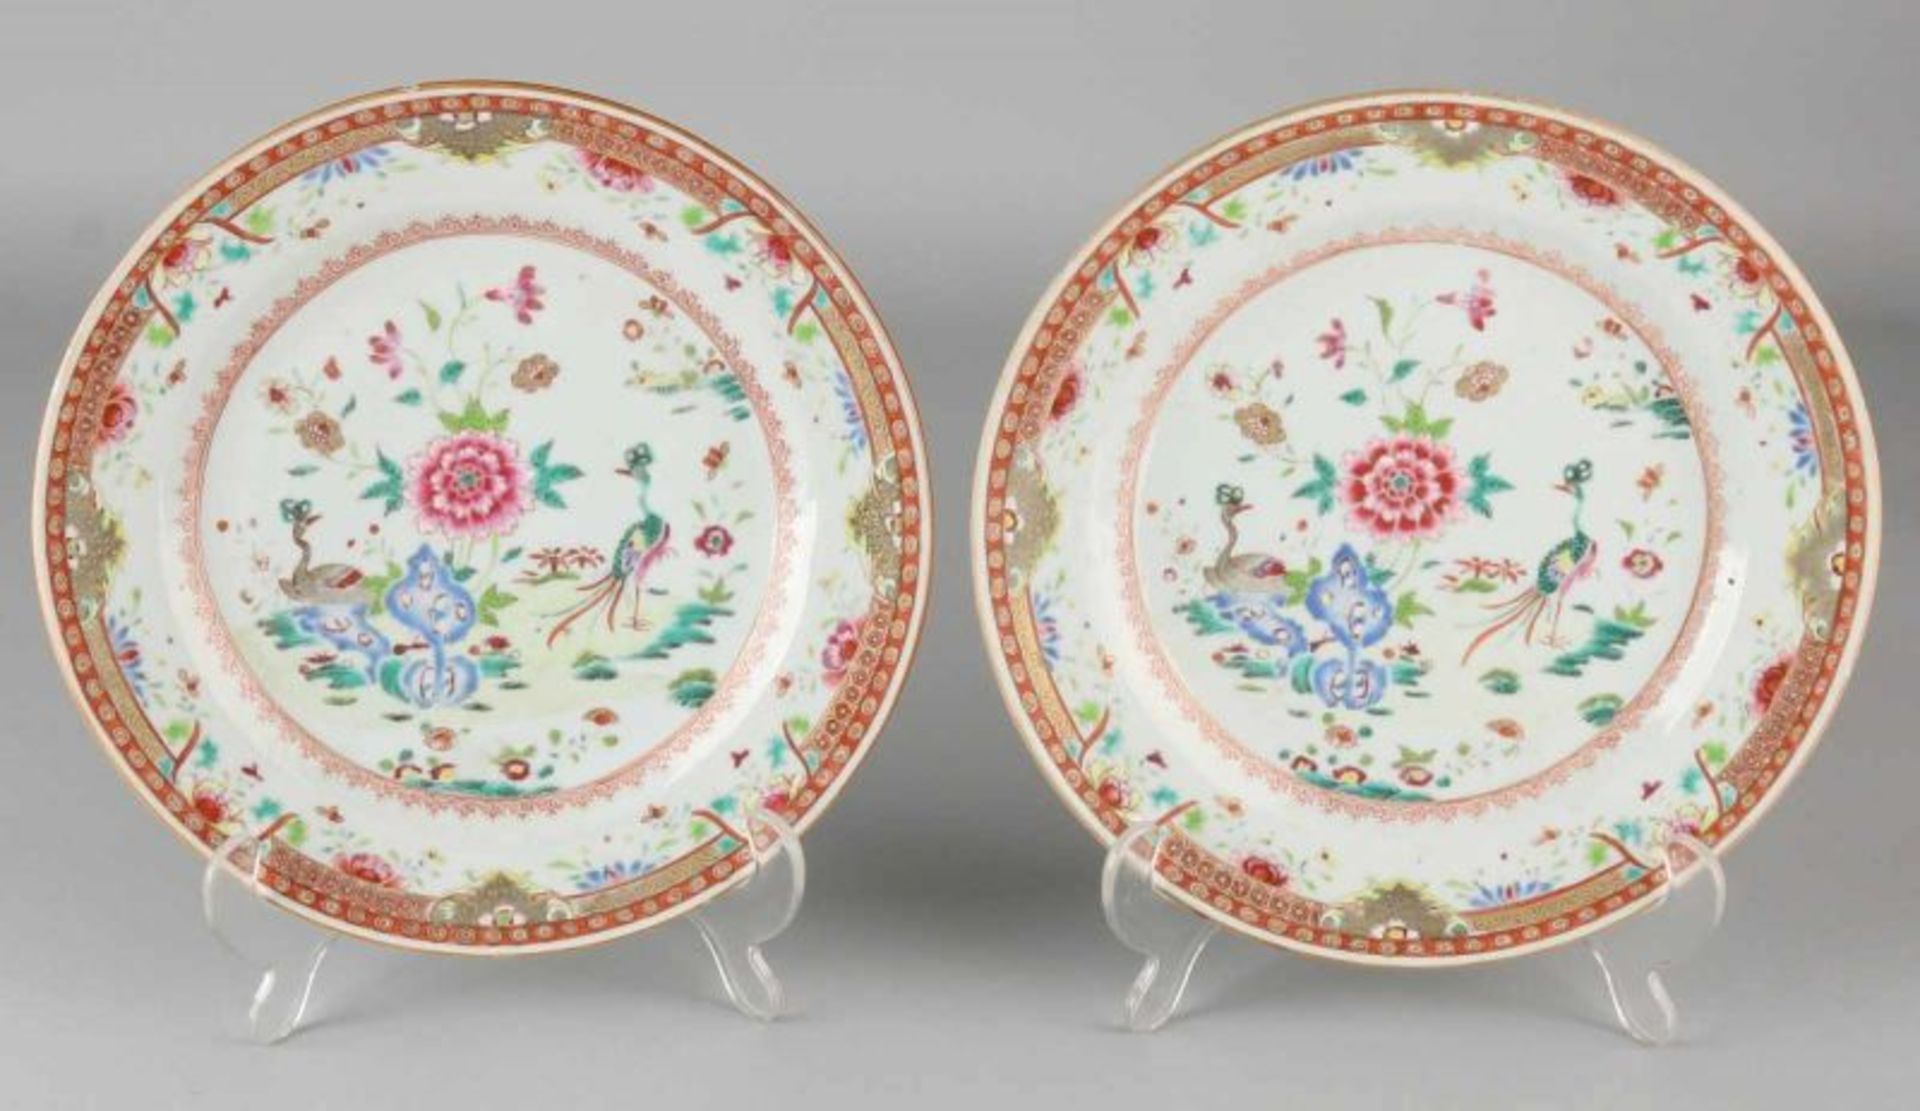 Two 18th century Chinese porcelain Family Rose plates with floral / decor paradise. Potato chips.